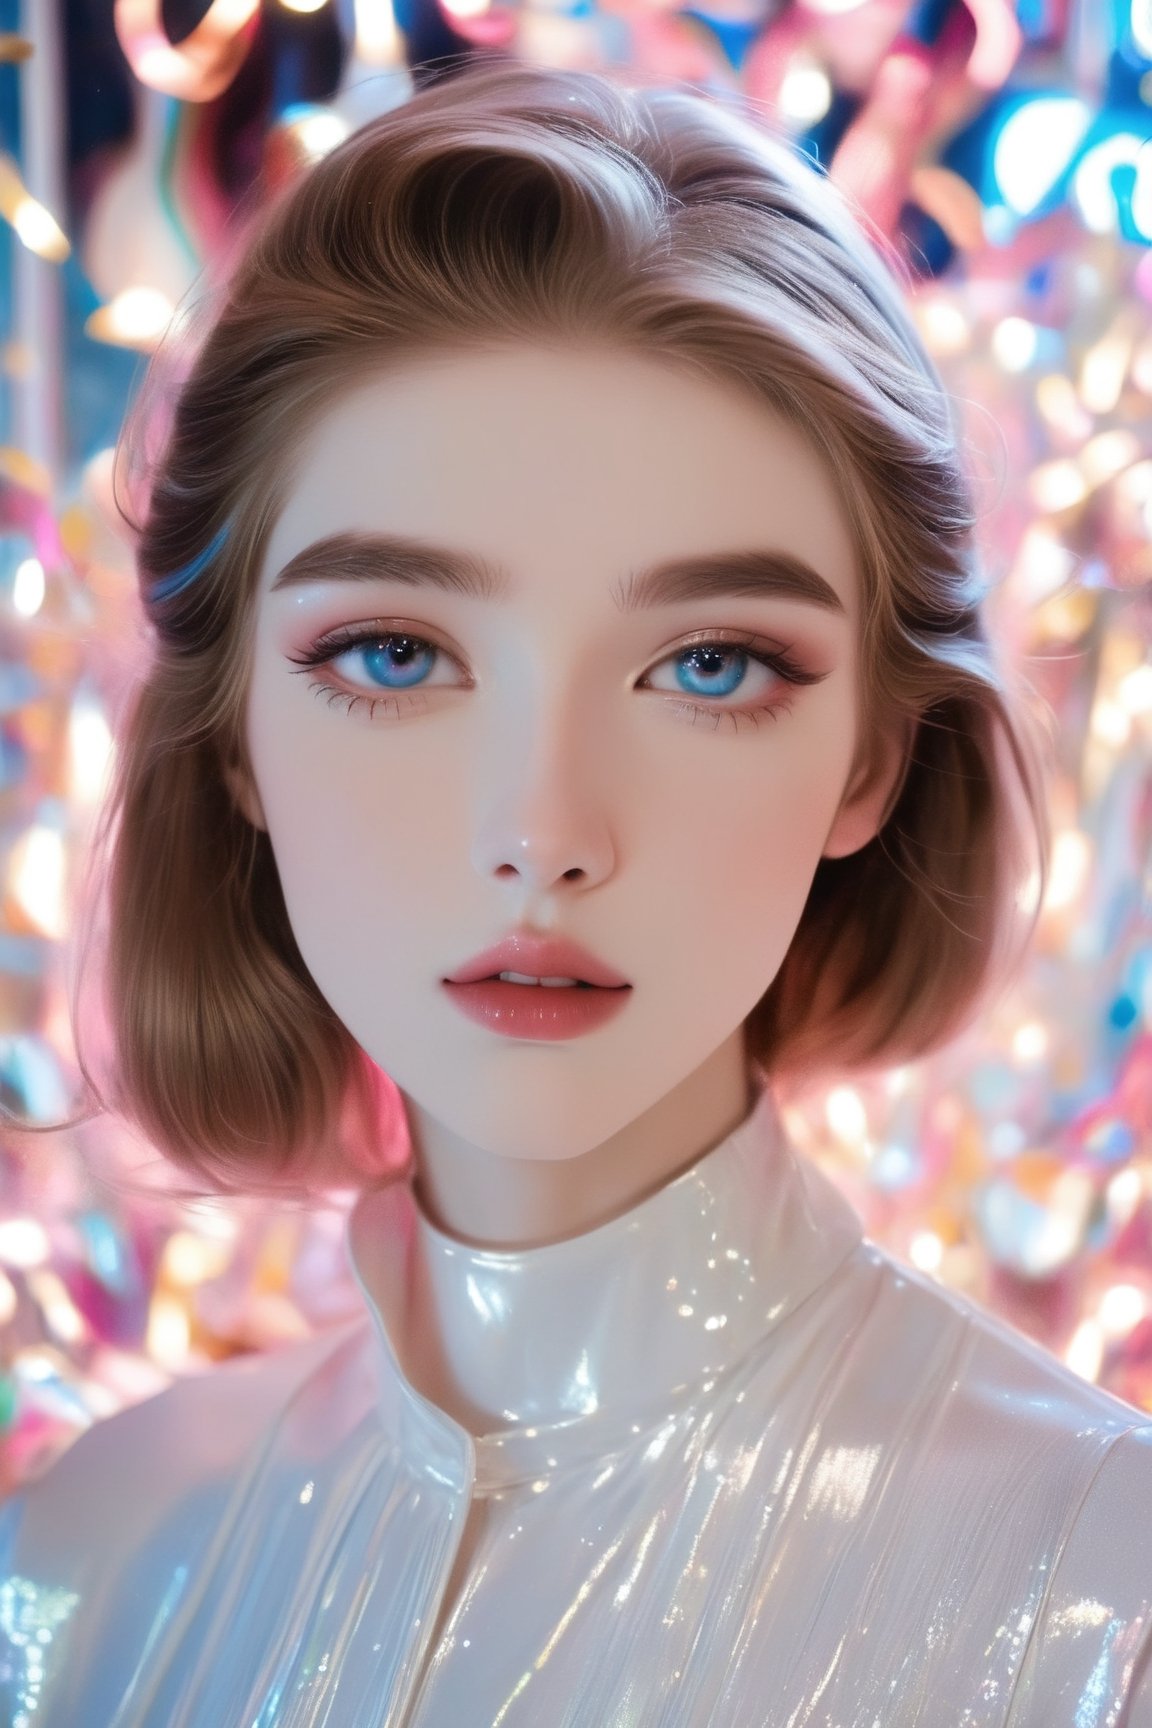 portrait, A young model, a stunning girl with big bright eyes, with long straight brown hair, dressed in mother-of-pearl white clothes that shimmer like a translucent neon sign, causing a feeling of light, renewal and brightness - the style of neon photography, a face made of fine porcelain like a vintage doll, light pink and blue veins are visible, gentle make-up on the face, iridescent glitters on the eyelids and lips, K-Eyes